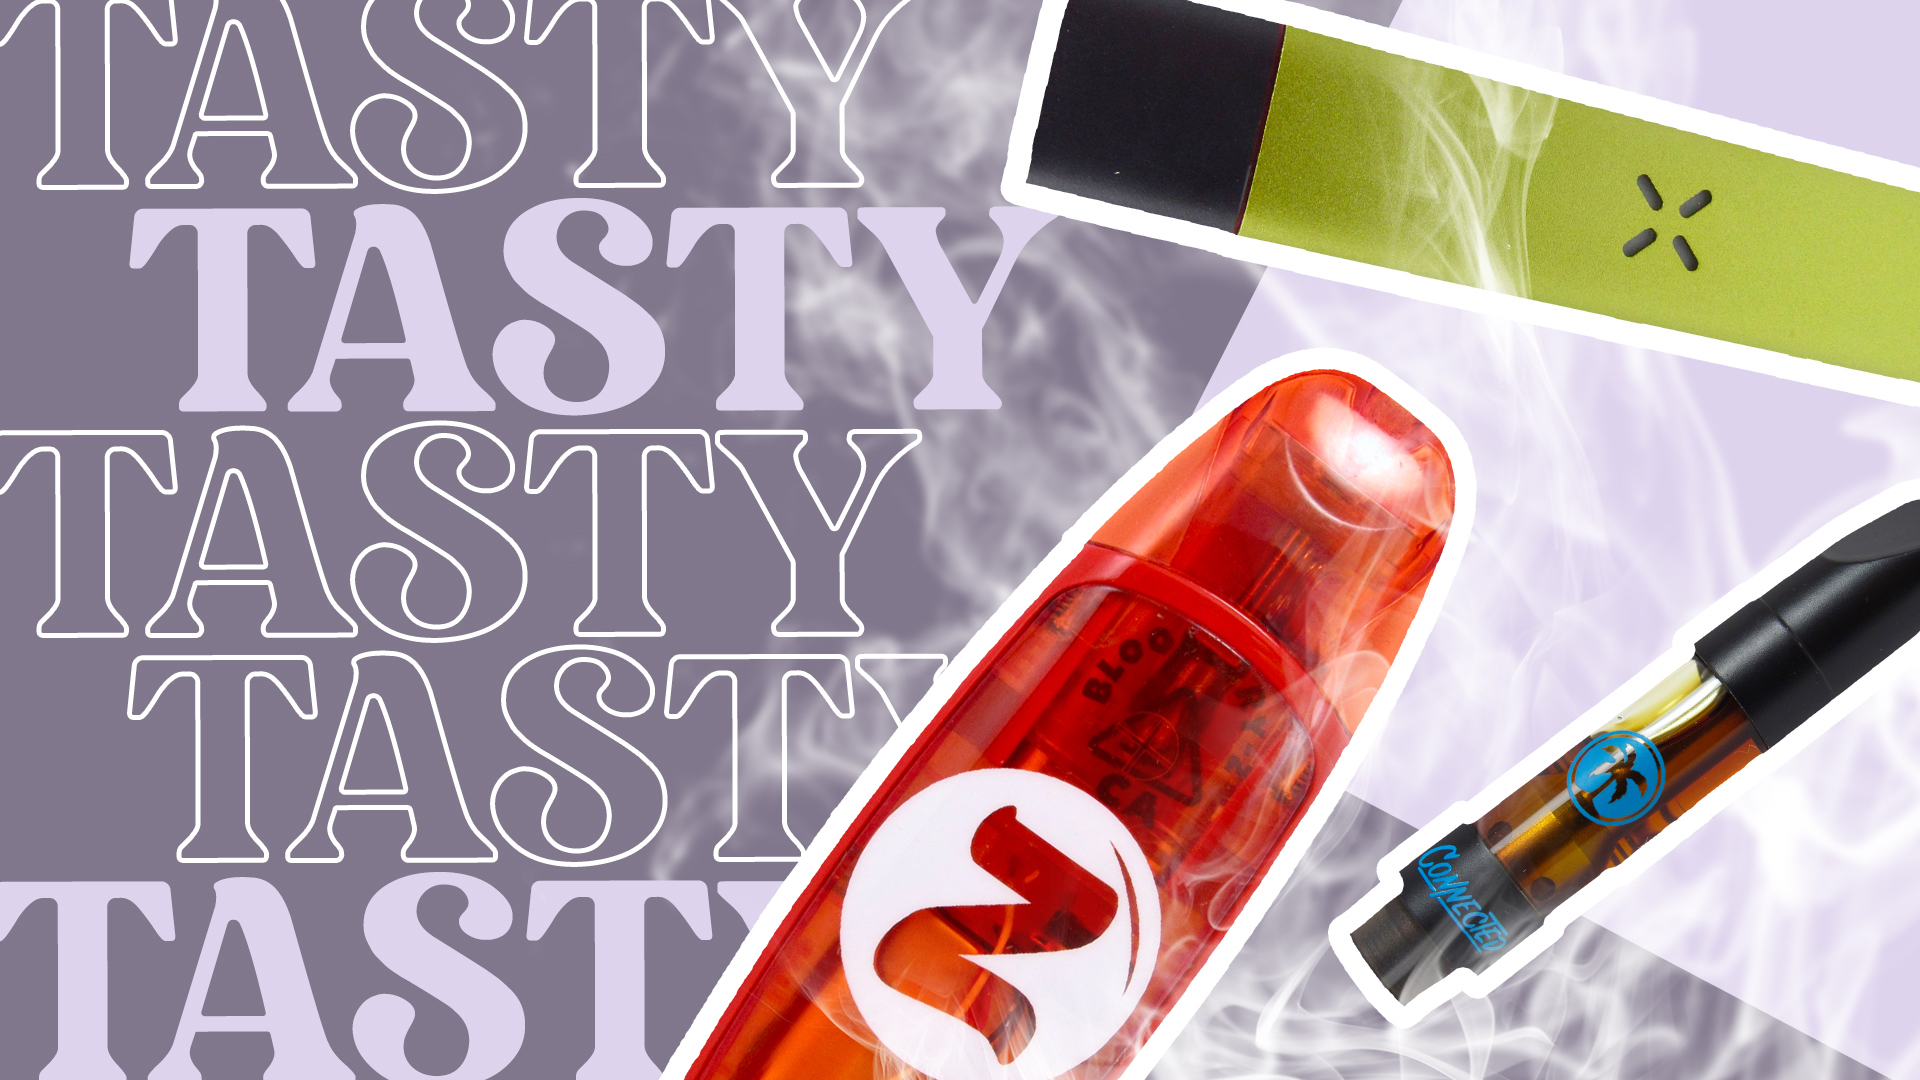 America's tastiest THC vapes of Labor Day and fall